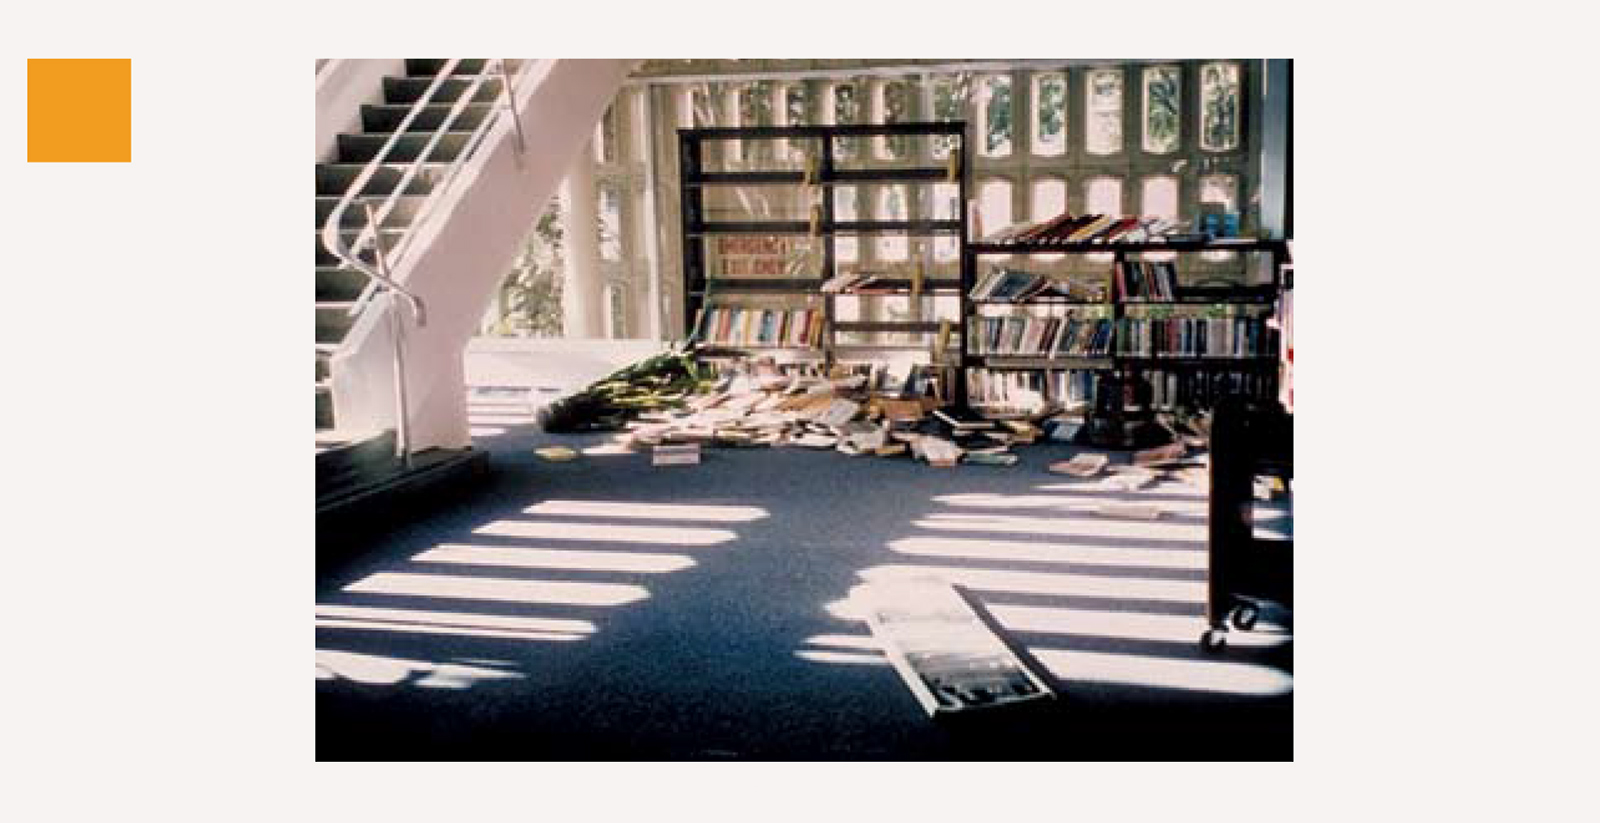 A photograph of toppled books at the Santa Monica Public Library in the aftermath of an earthquake on 17 January 1994.